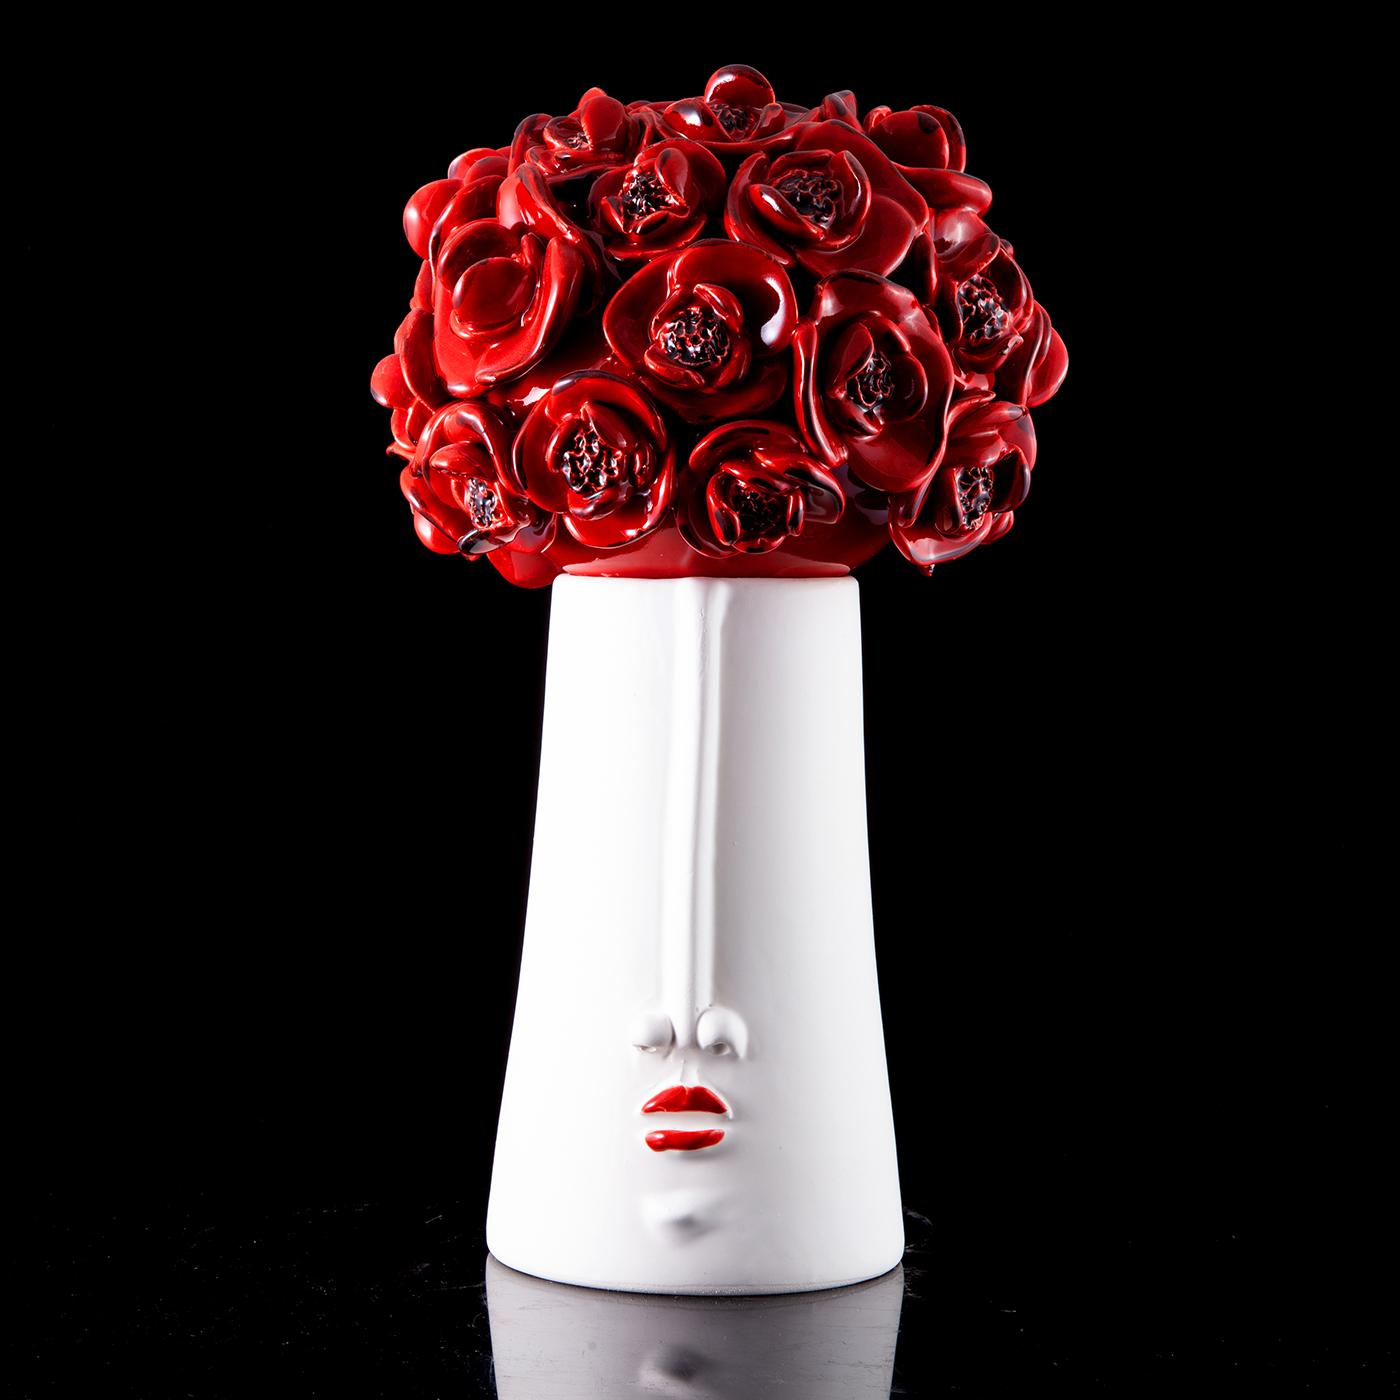 Marked by anthropomorphic traits immediately revealing its playful sculptural allure, this ceramic piece will be a precious ornament for the table. A bouquet of vibrant-red poppies gets sculpted from the lid, which lifts to reveal a practical a wide